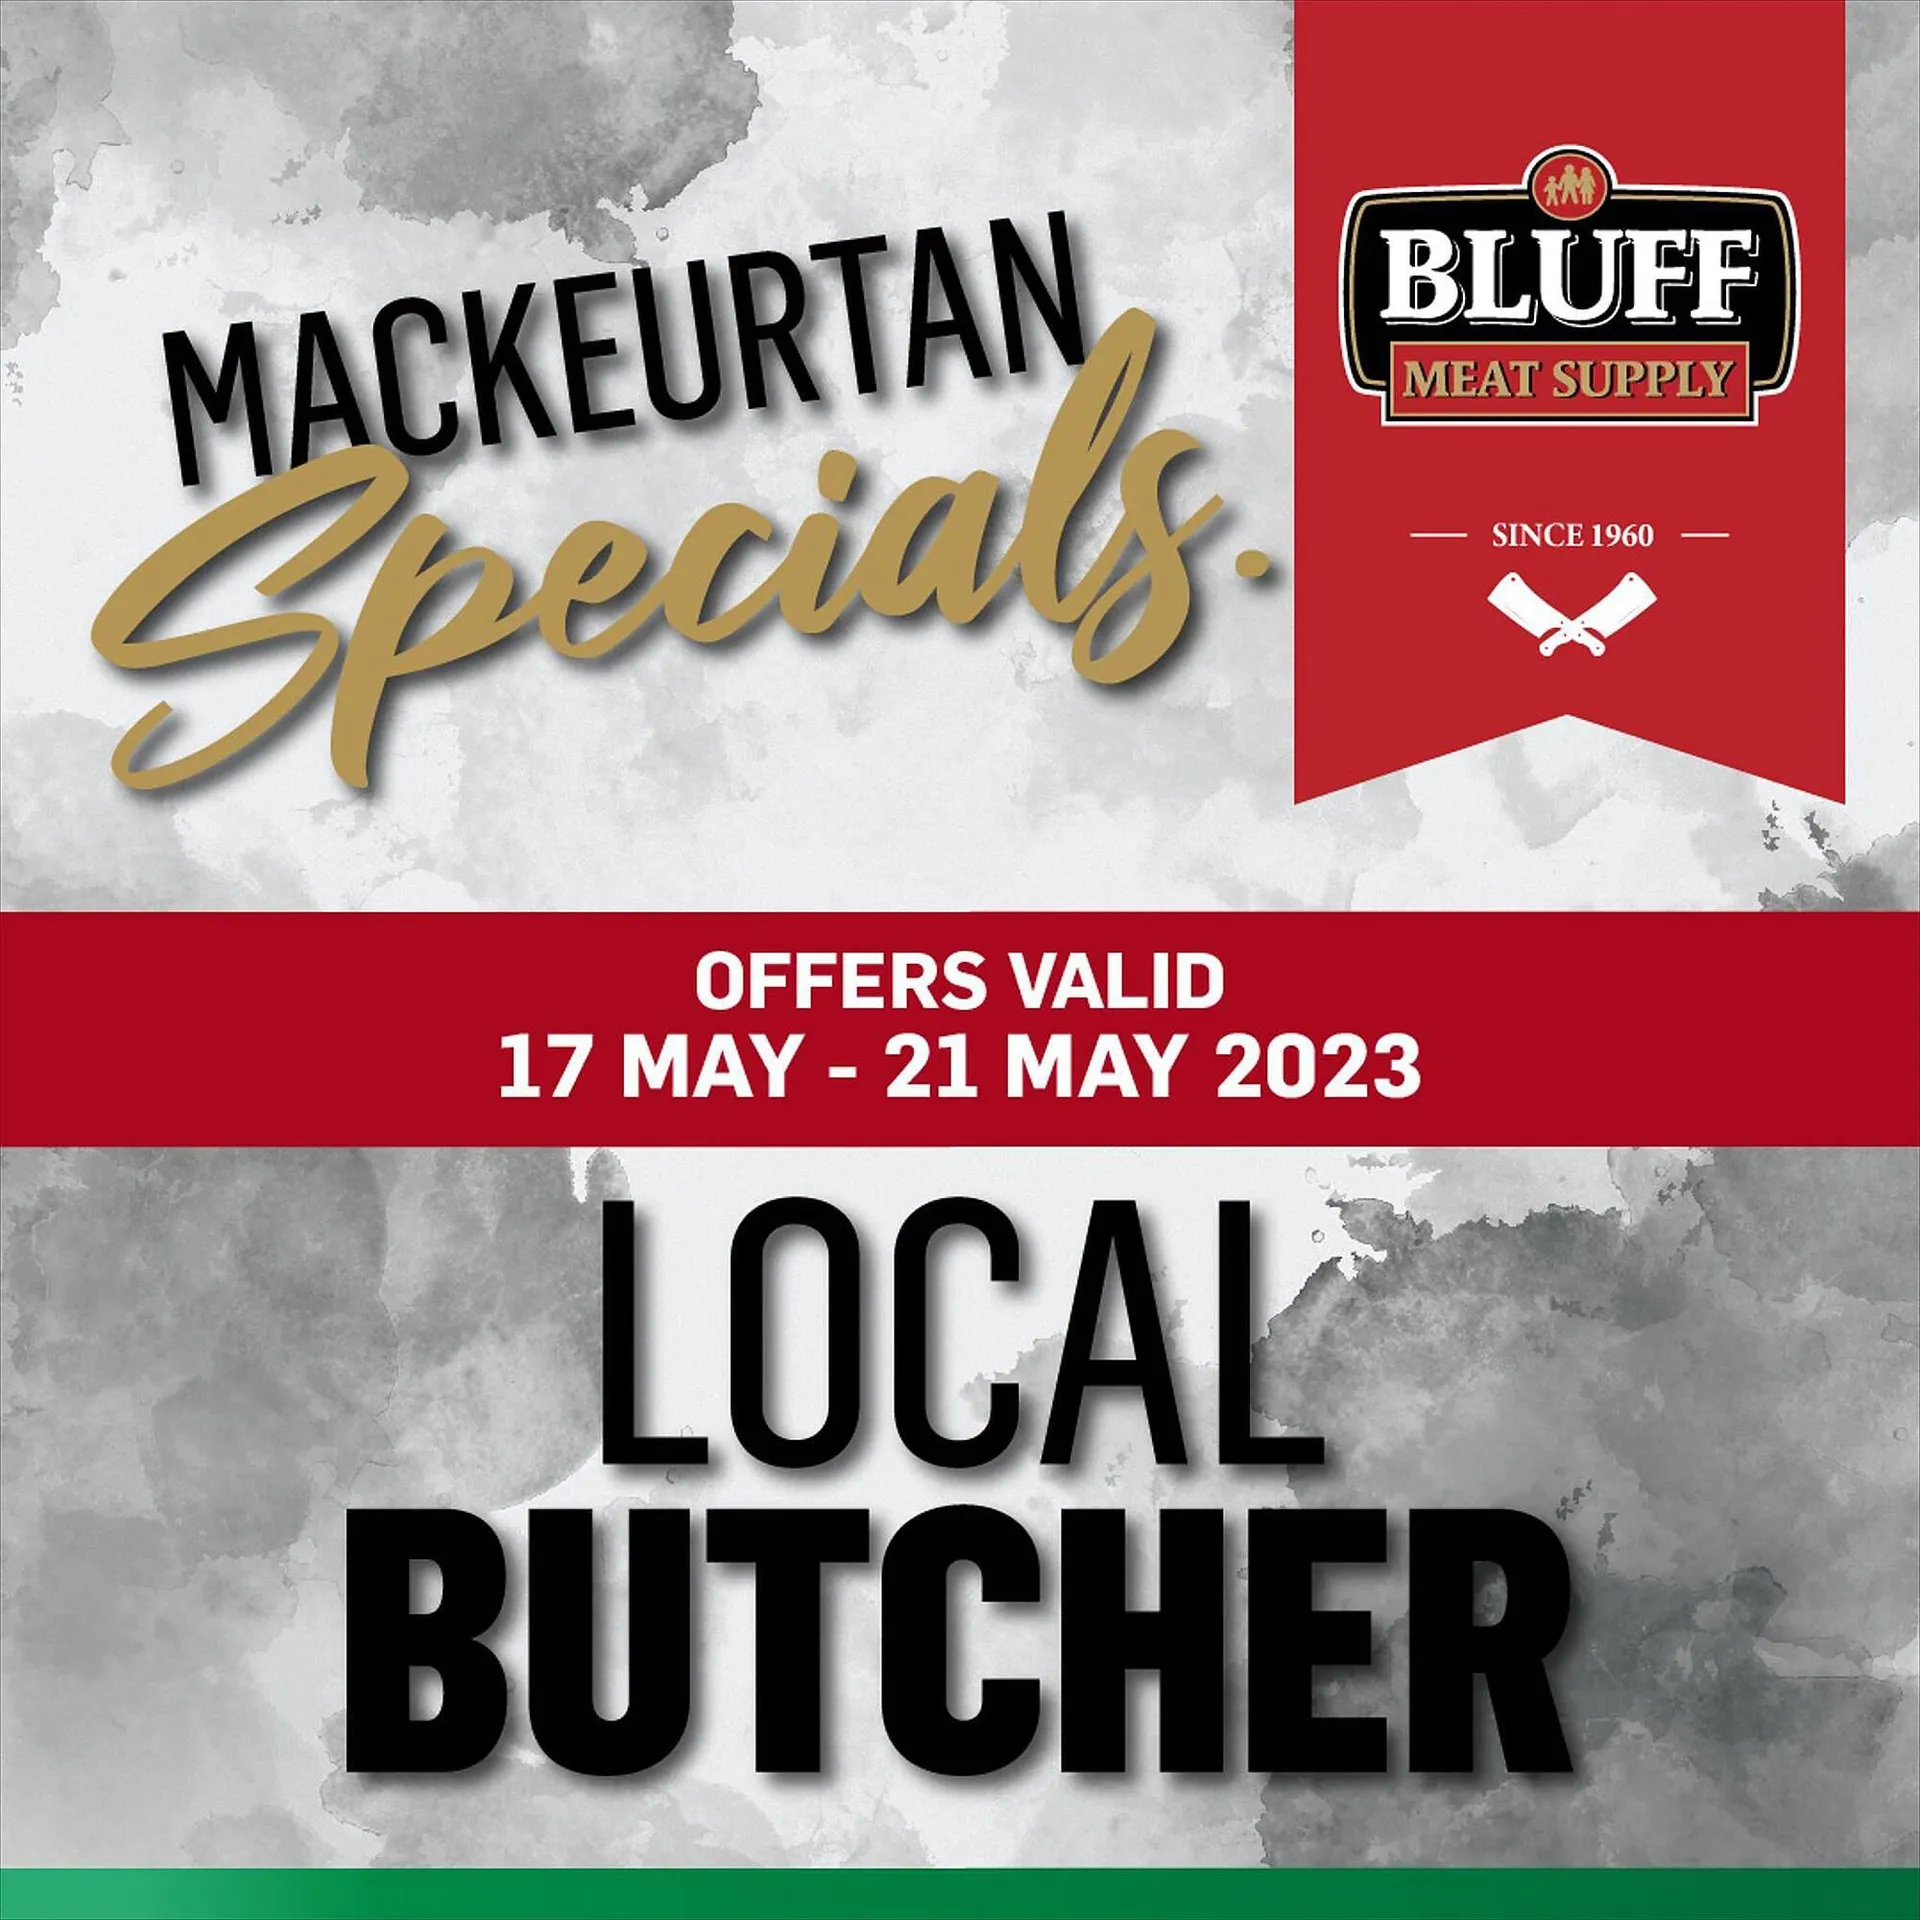 Bluff Meat Supply catalogue - 1